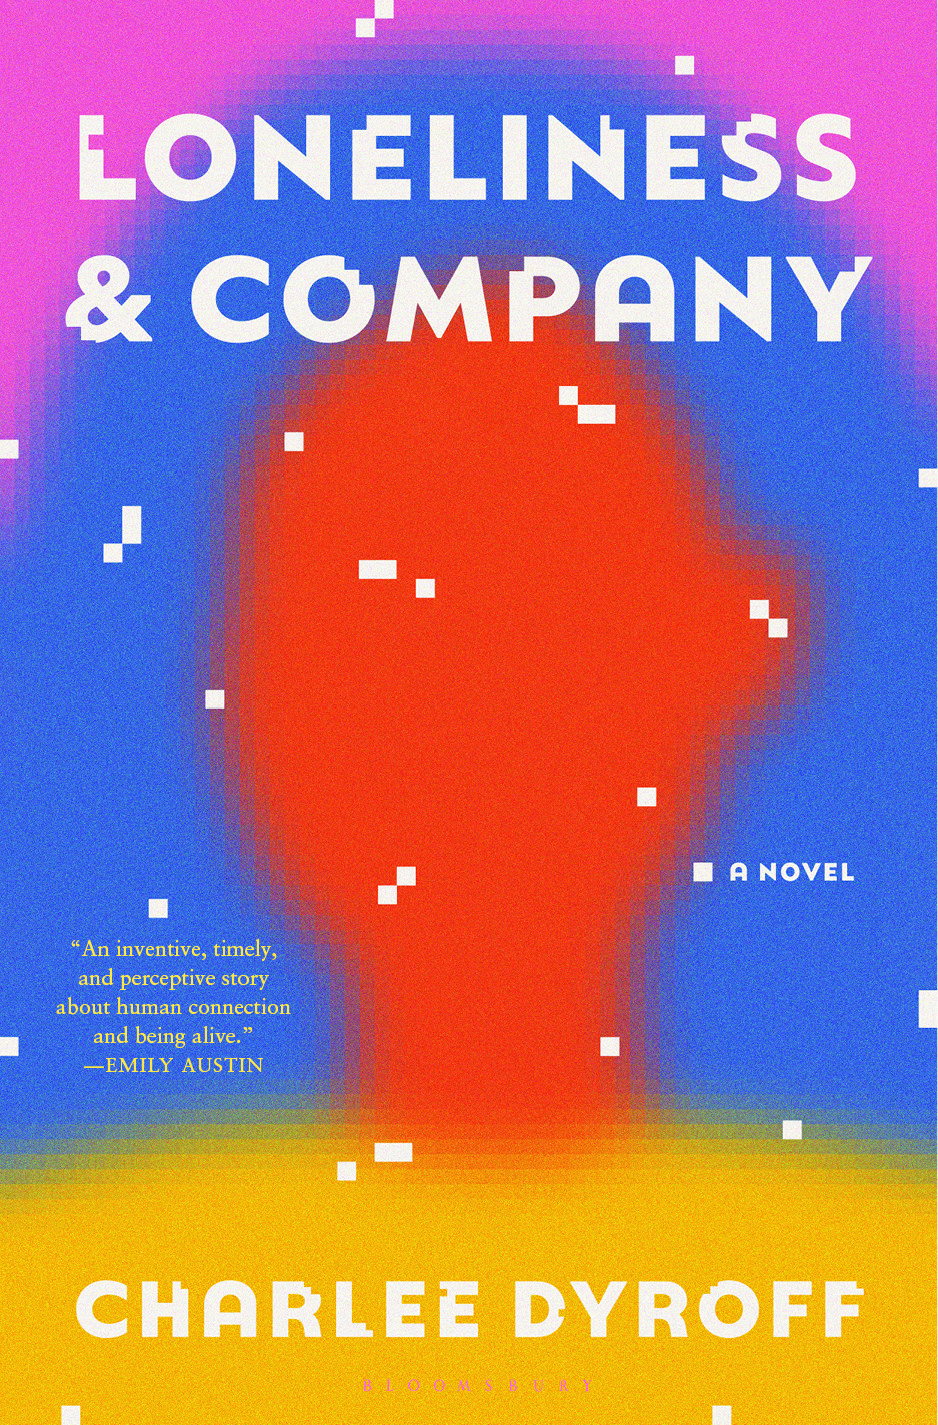 Download Loneliness & Company PDF by Charlee Dyroff